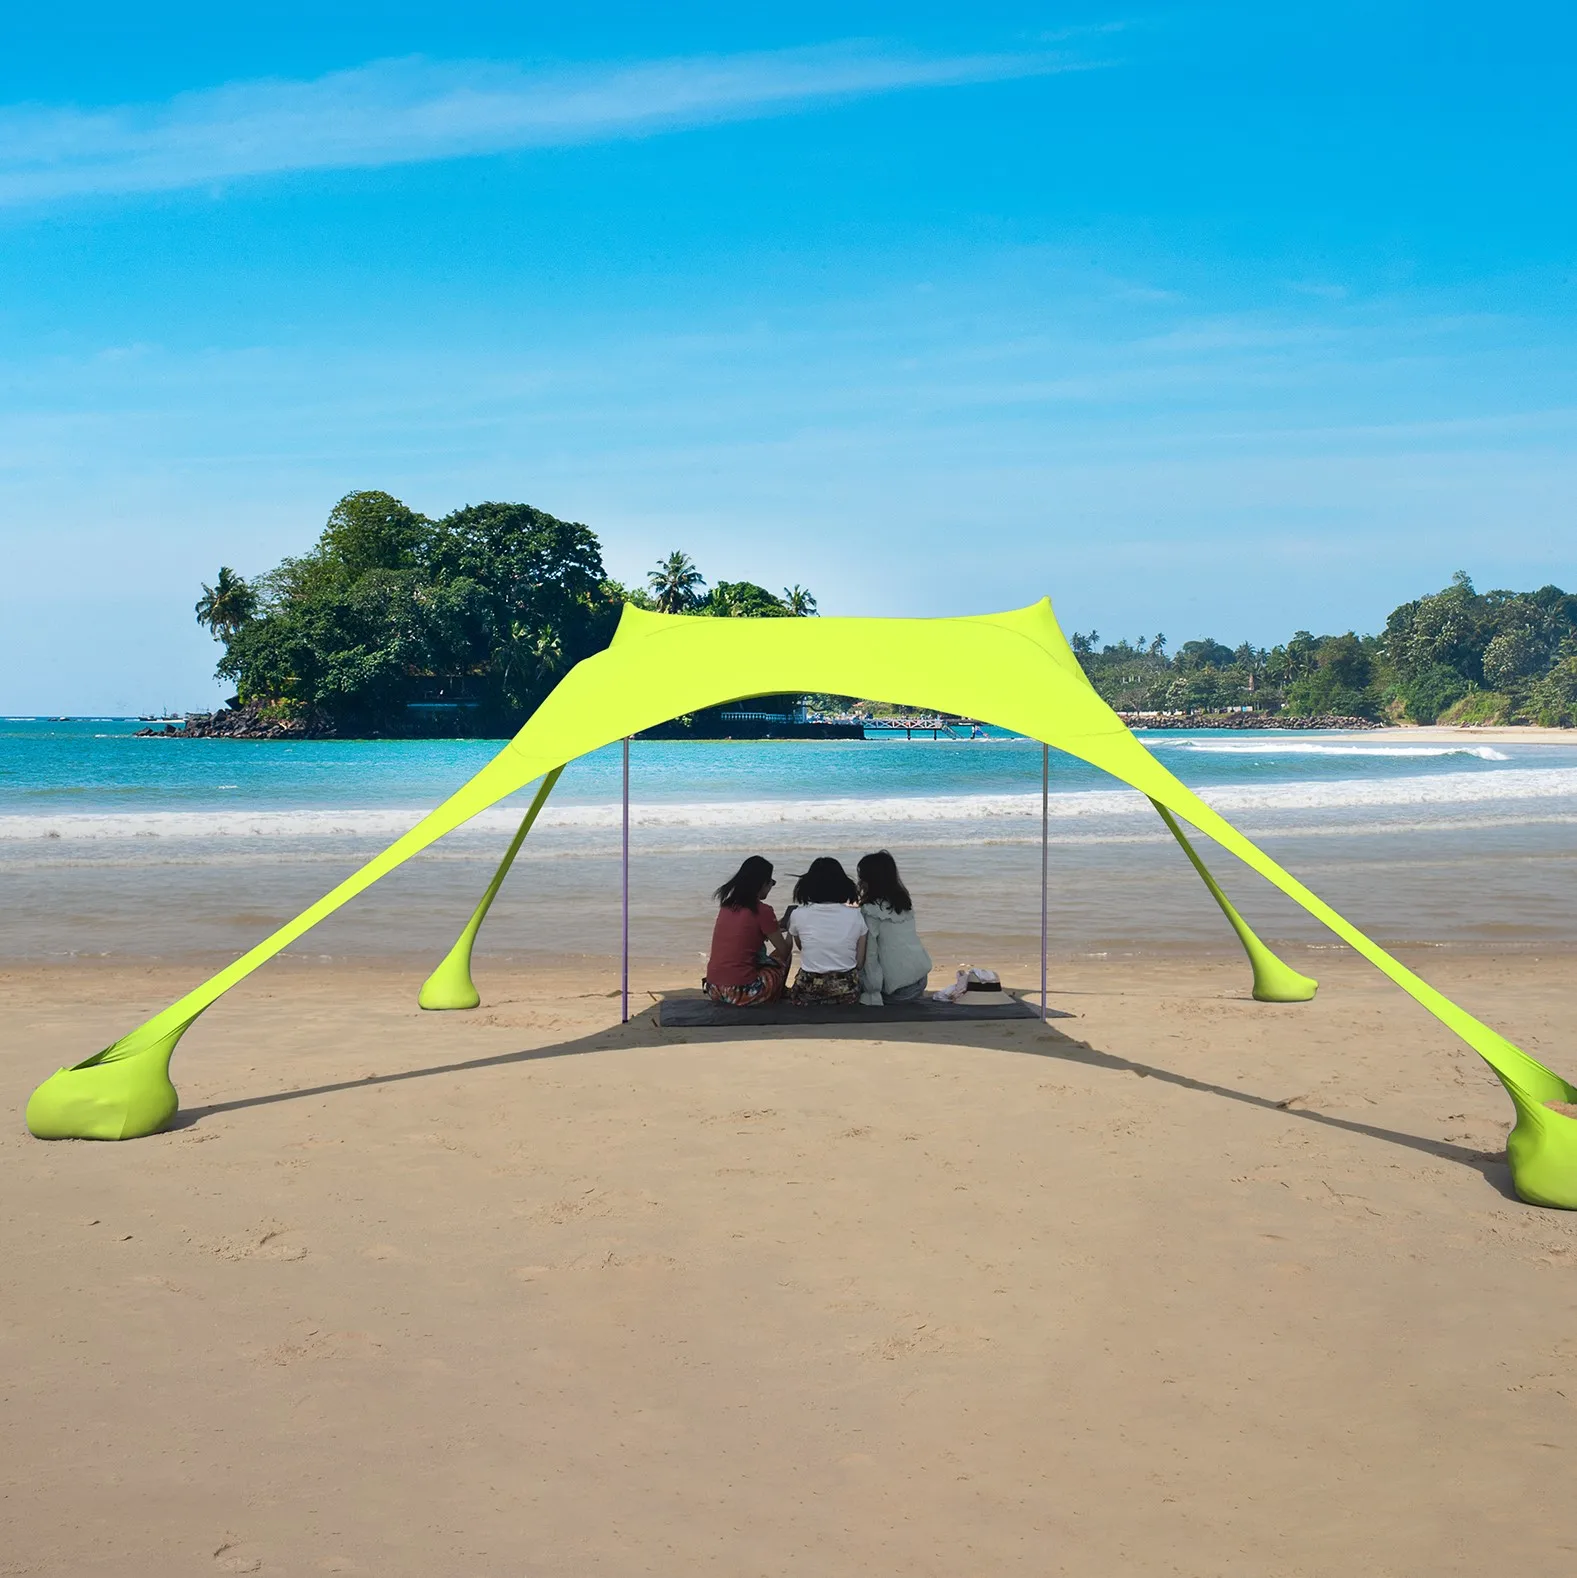 New Design Big Size Camping Shelters Large Canopy Beach Tent Pop Up Shade